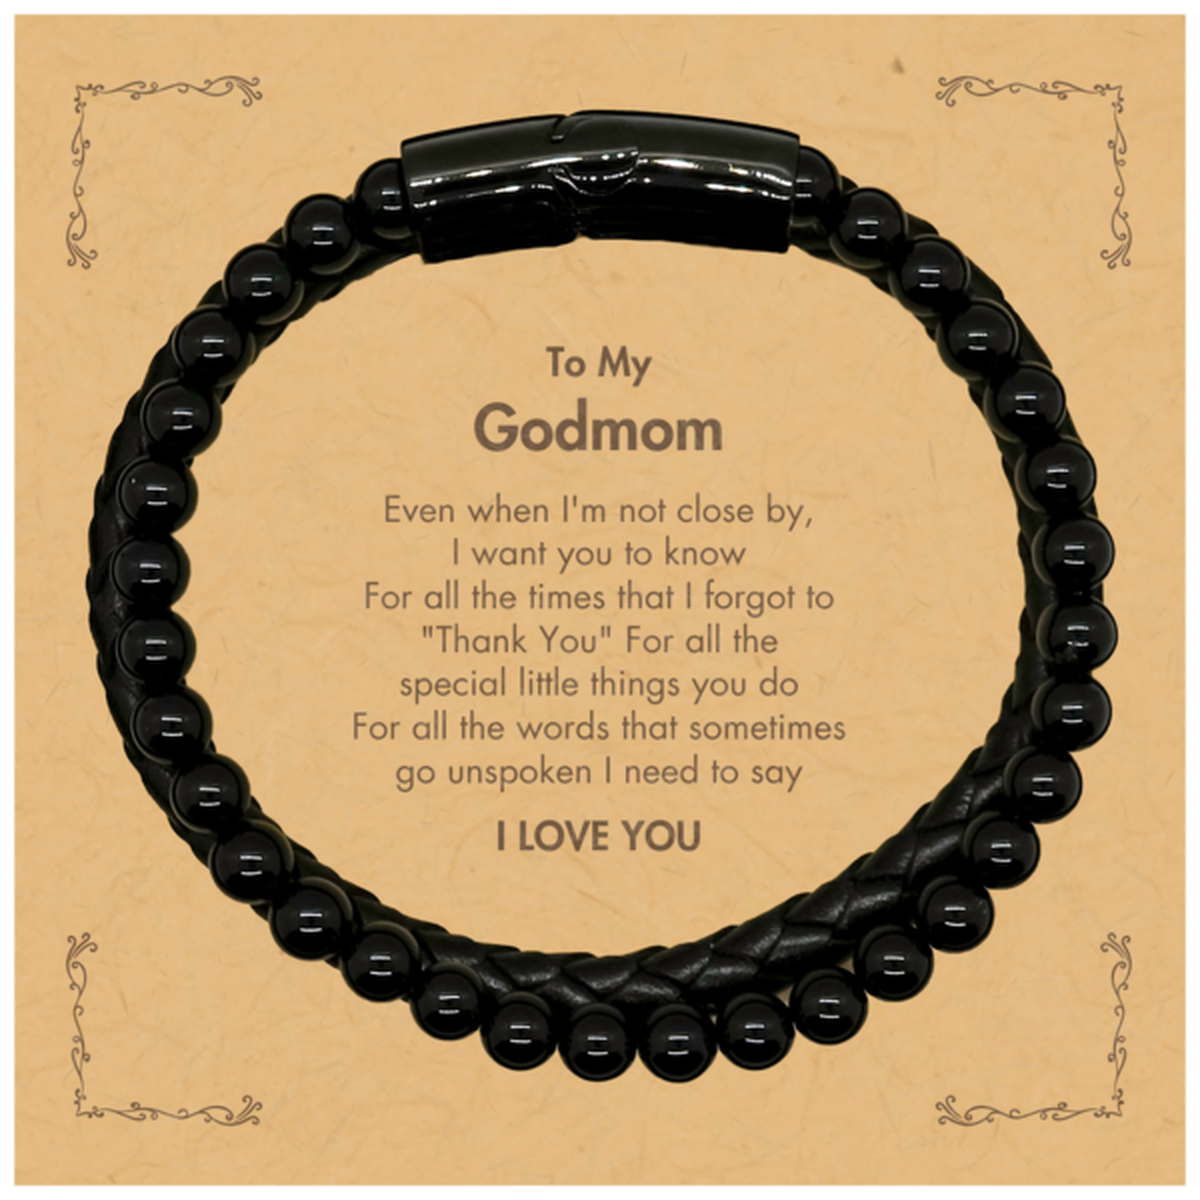 Thank You Gifts for Godmom, Keepsake Stone Leather Bracelets Gifts for Godmom Birthday Mother's day Father's Day Godmom For all the words That sometimes go unspoken I need to say I LOVE YOU